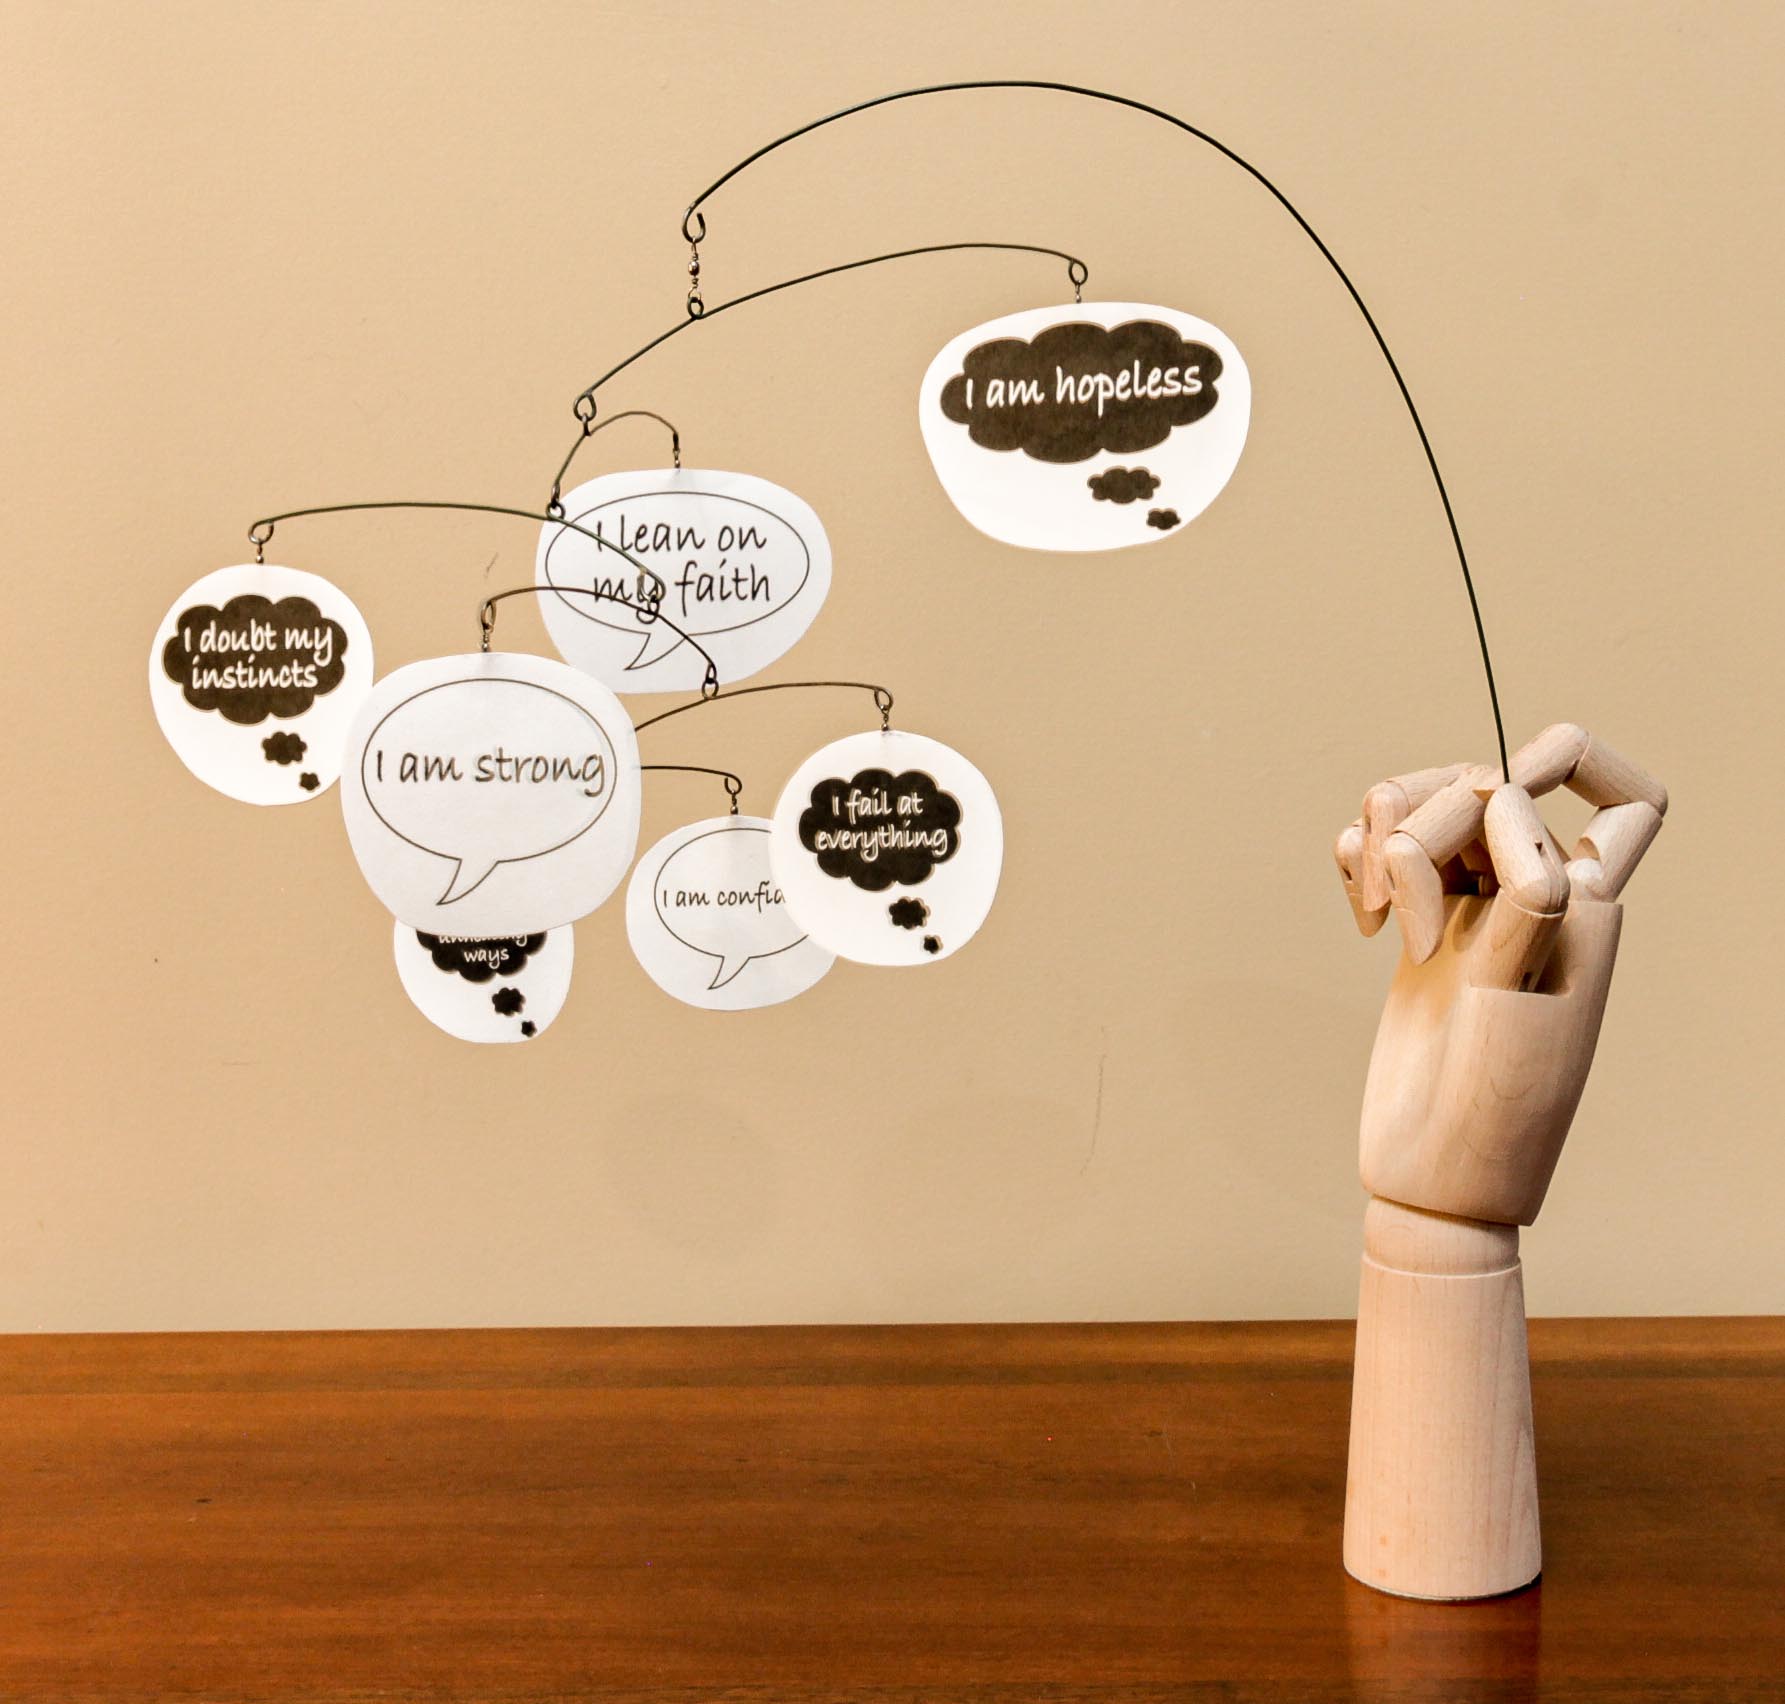 A wooden model hand holding a mobile with floating pieces with speech bubbles that say phrases such as "I am strong." "I am hopeless." "I am confidant." "I fail at everything." The positive affirmations are in white bubbles and the negative in black bubbles.